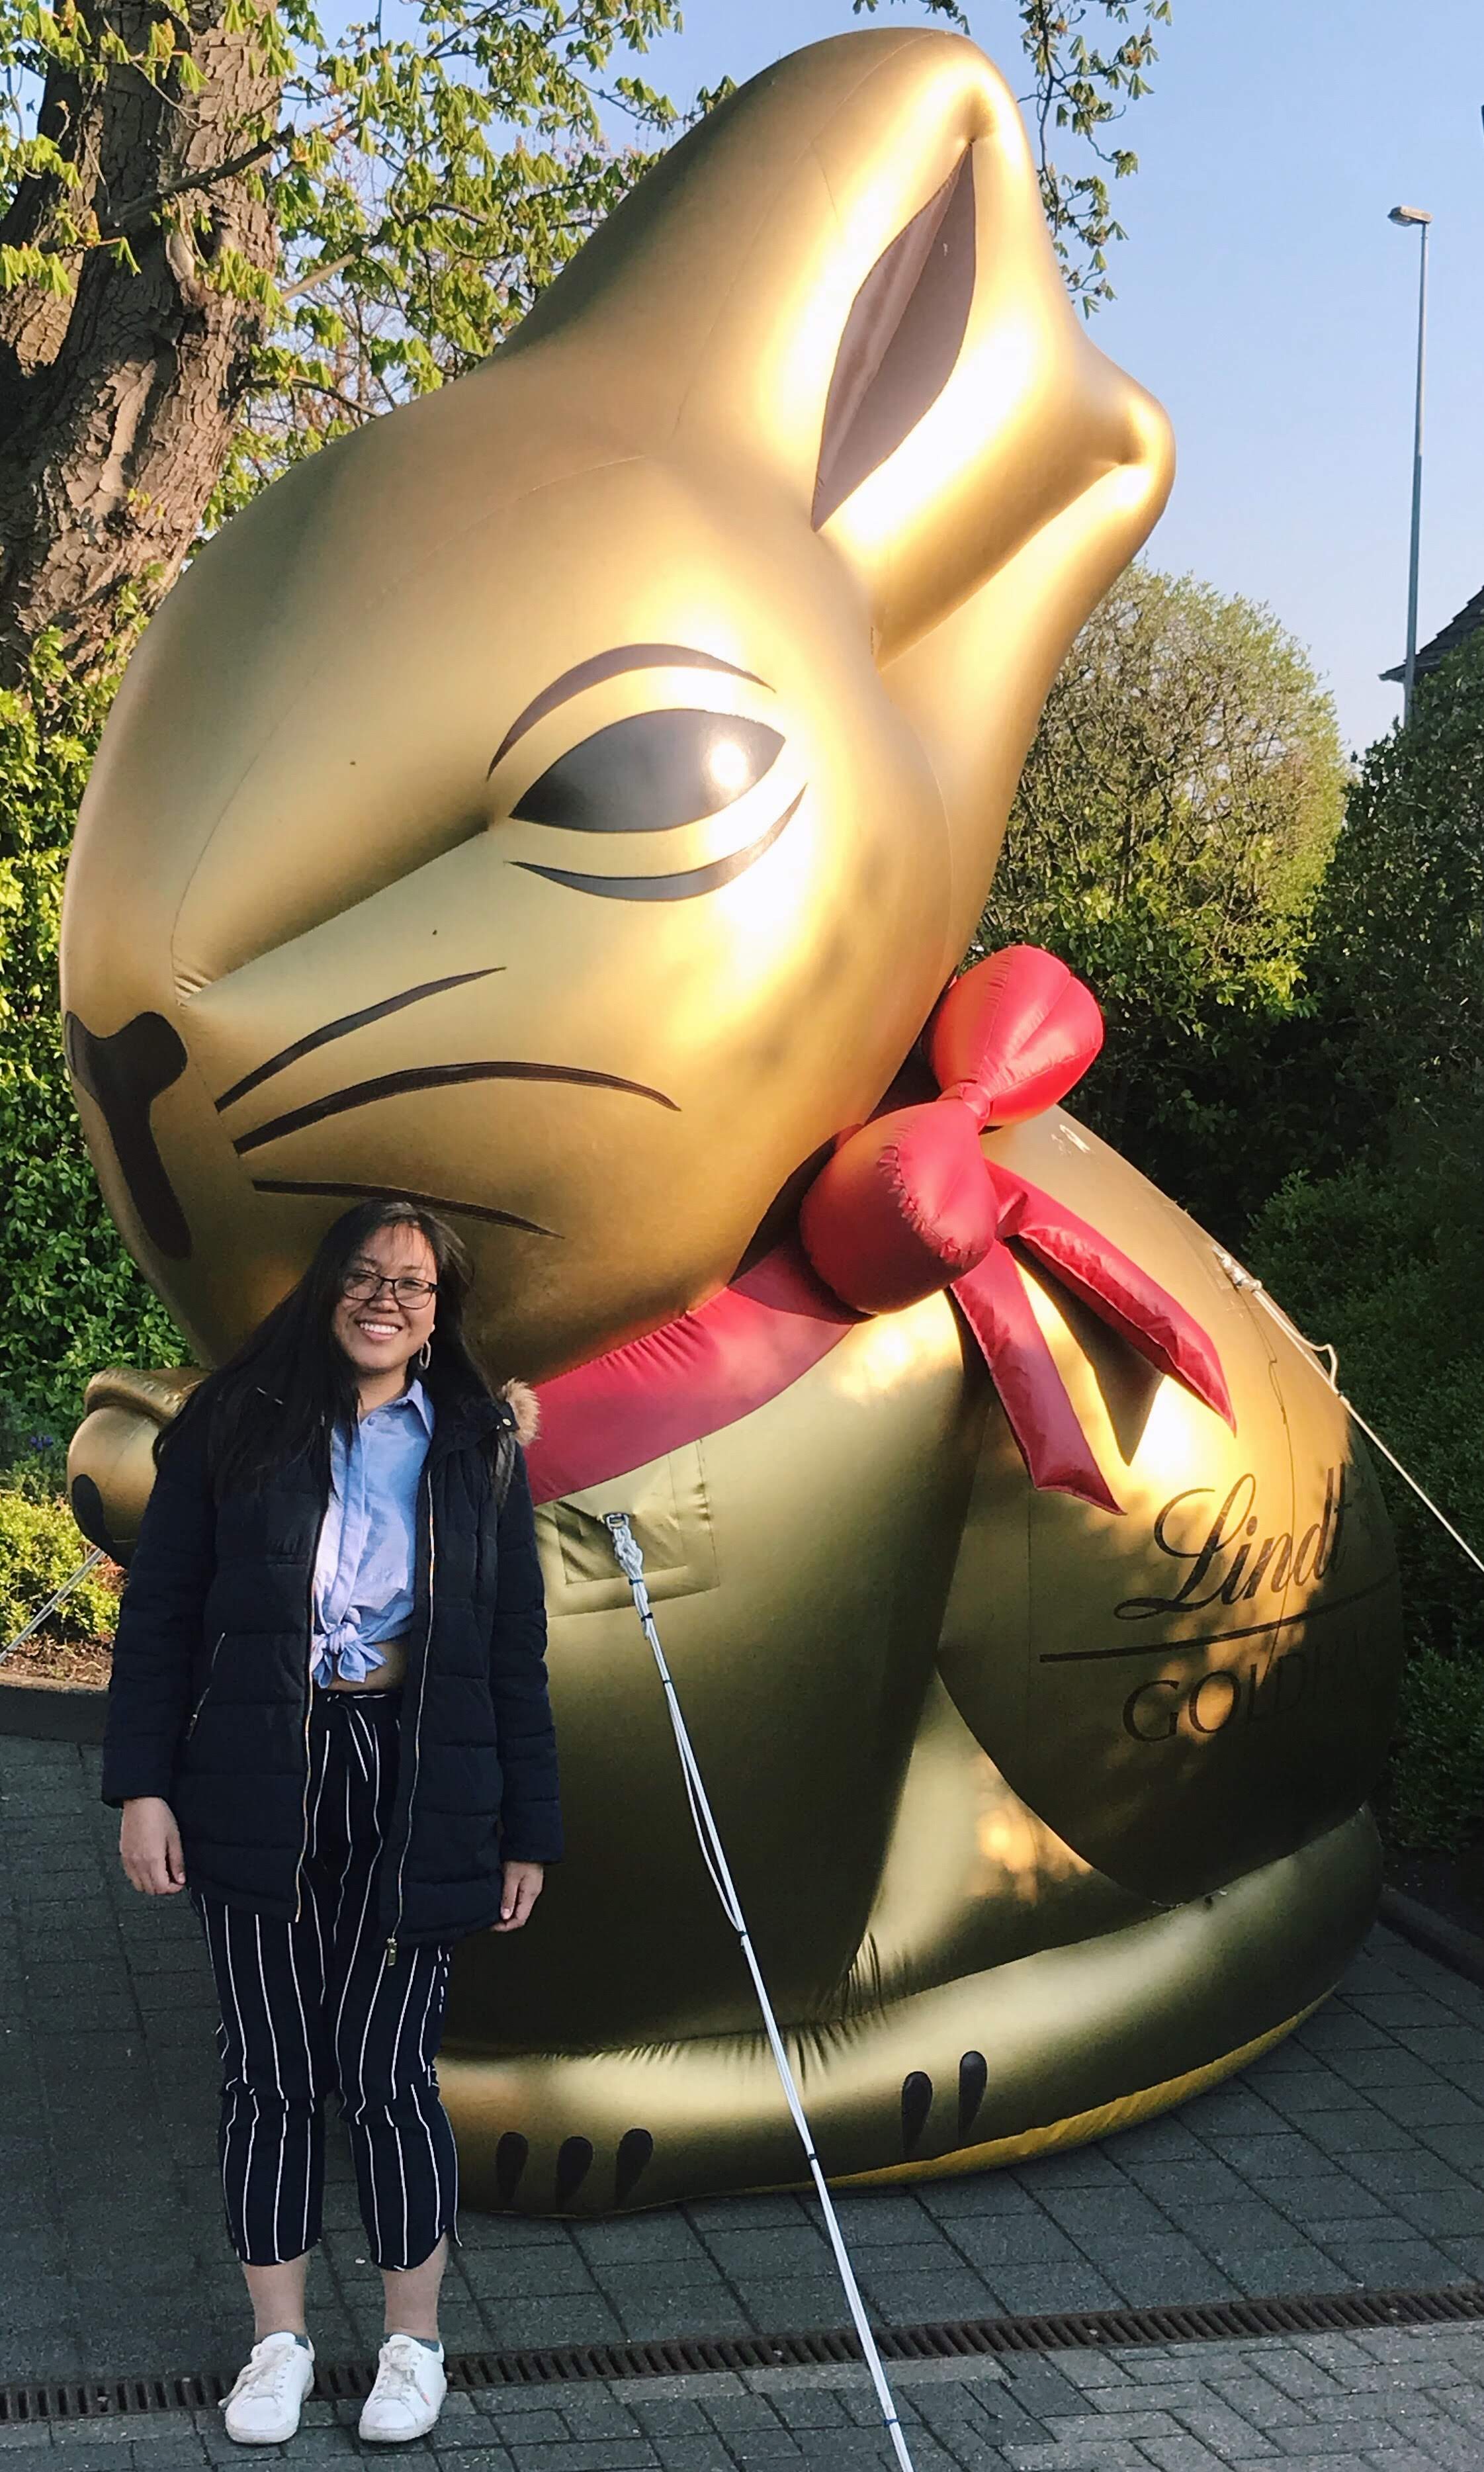 Lisa Han posing in front of a large, inflatable bunny rabbit